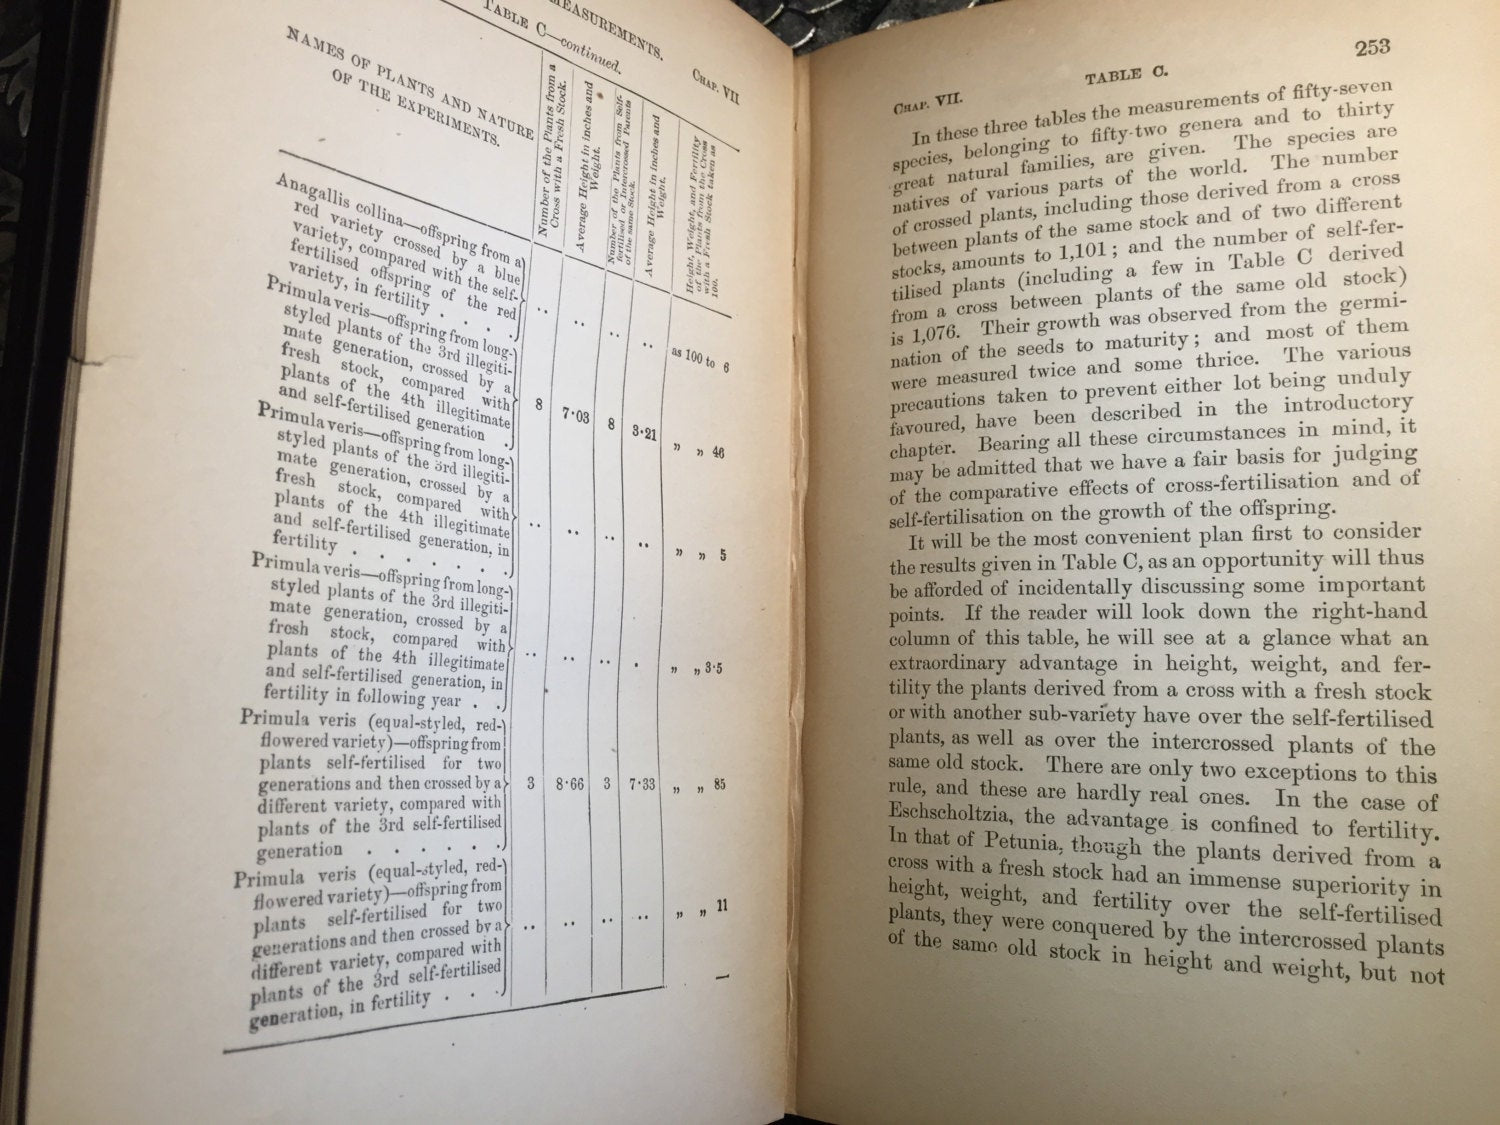 Effects of Cross and Self Fertilization in the Vegetable Kingdom, Charles Darwin, Early Botany Book, 1895